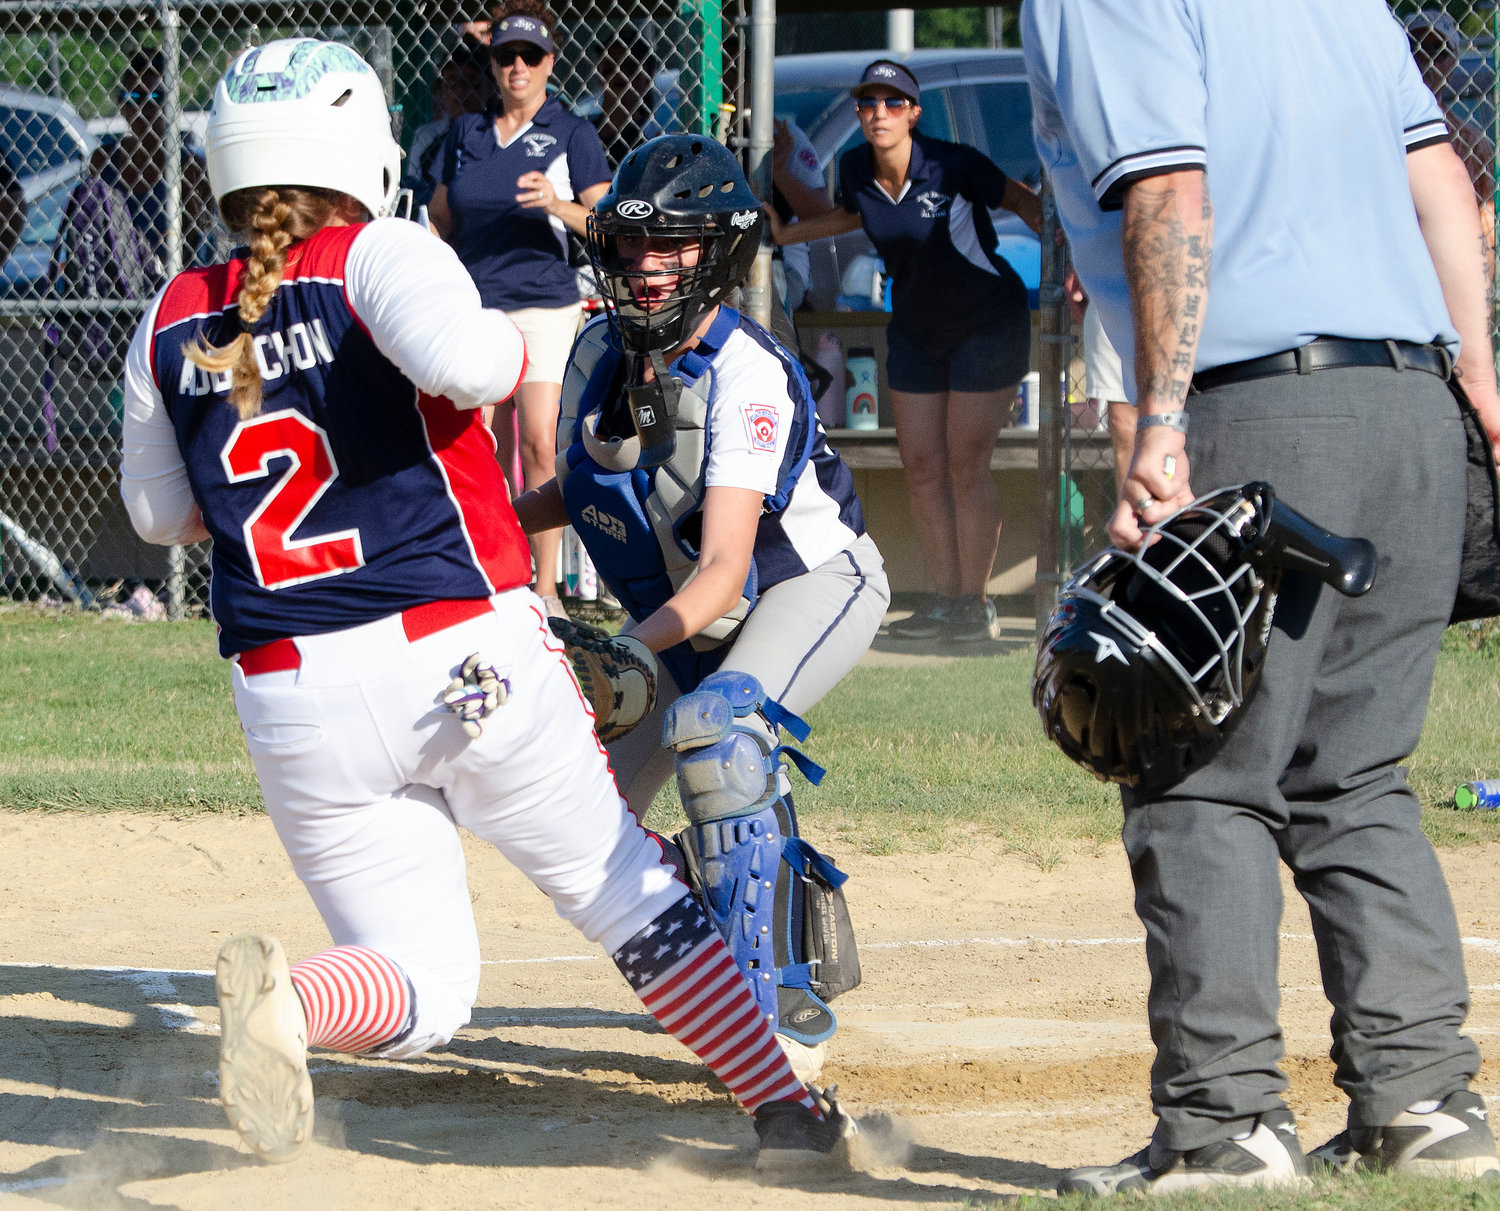 Kaylyn Aubuchon gets cut down at the plate in the first inning.